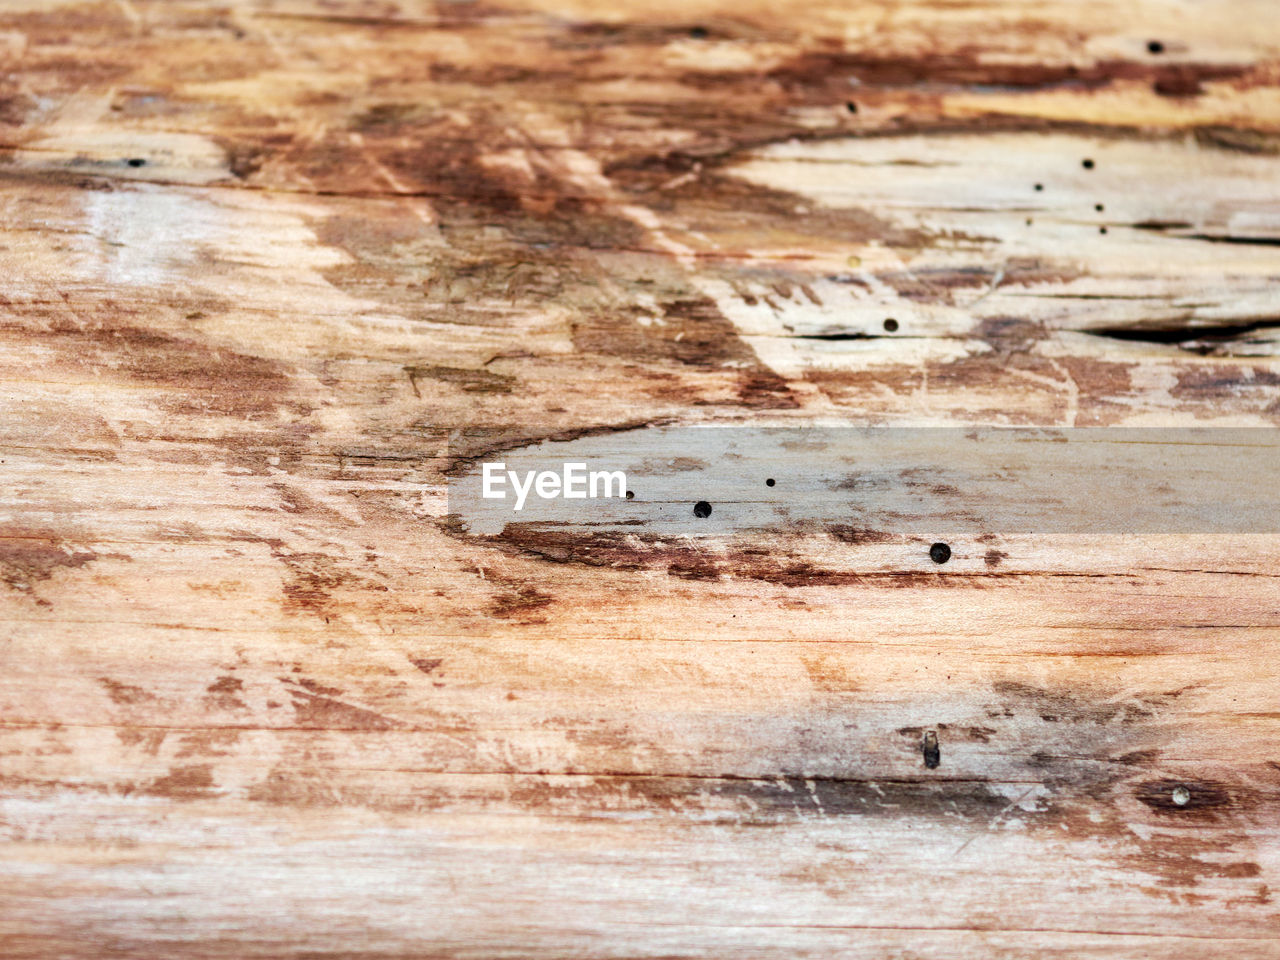 HIGH ANGLE VIEW OF AN INSECT ON WOOD